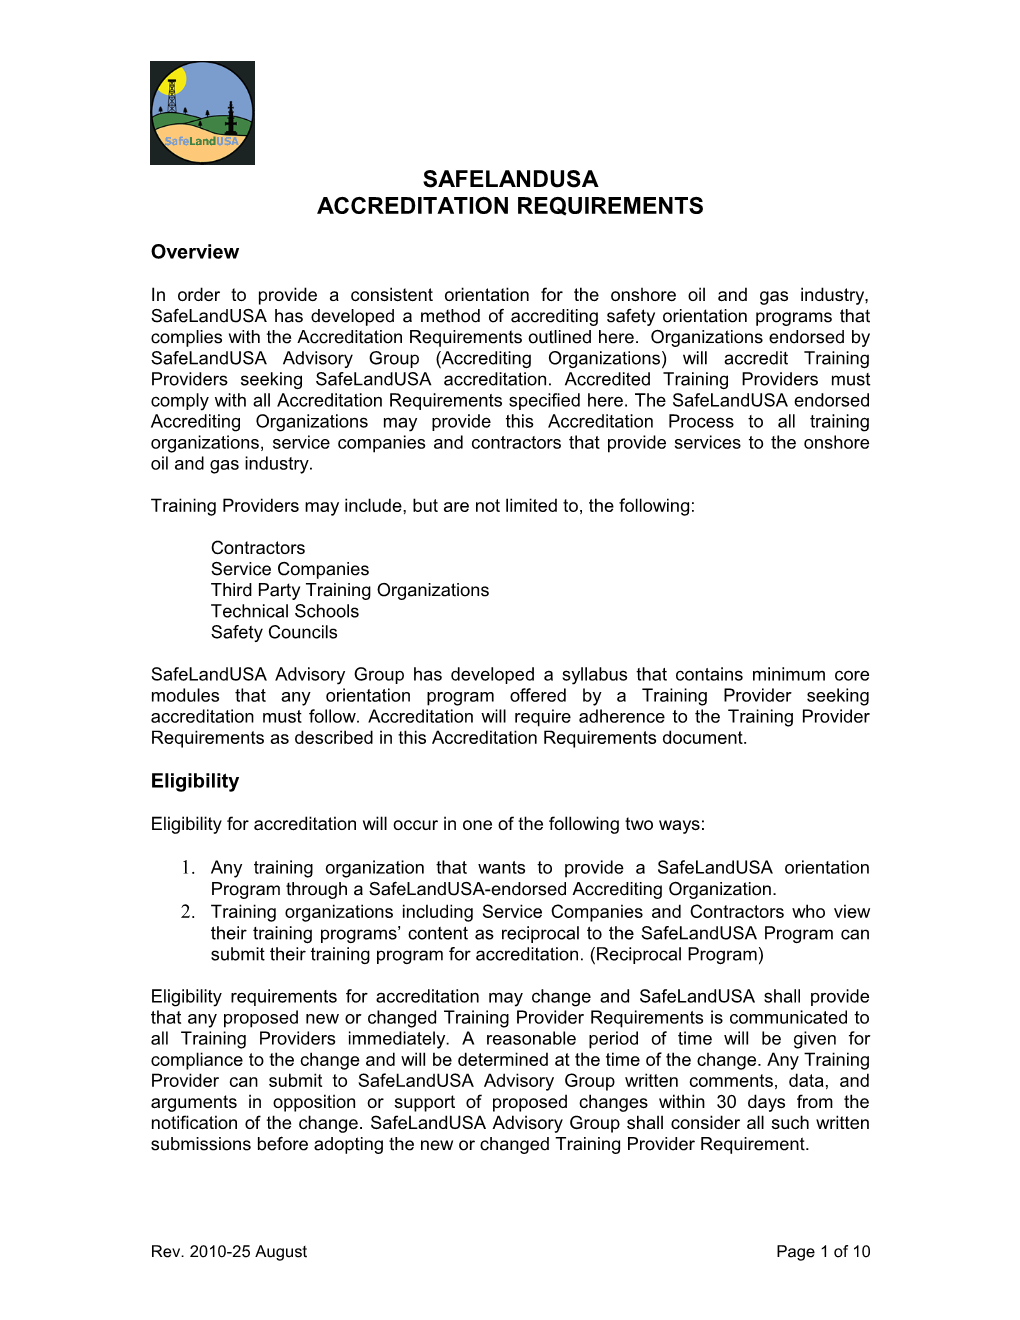 Accreditation Requirements